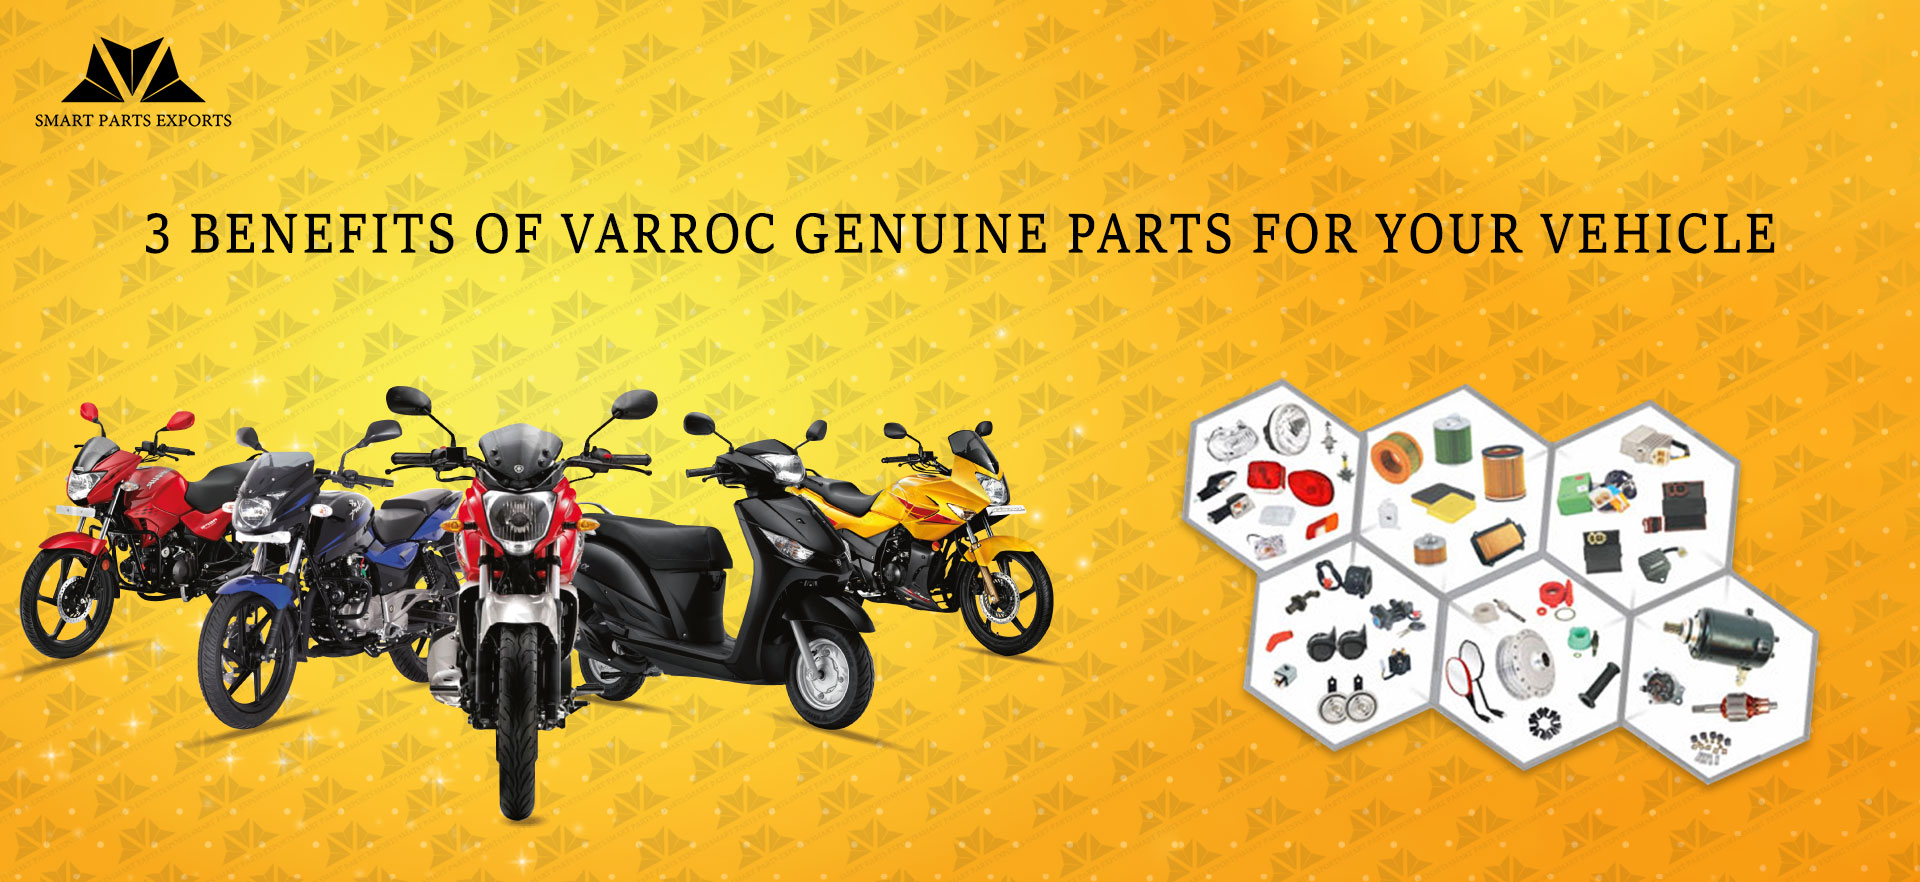 3 Benefits of Varroc Genuine Parts for Your Vehicle